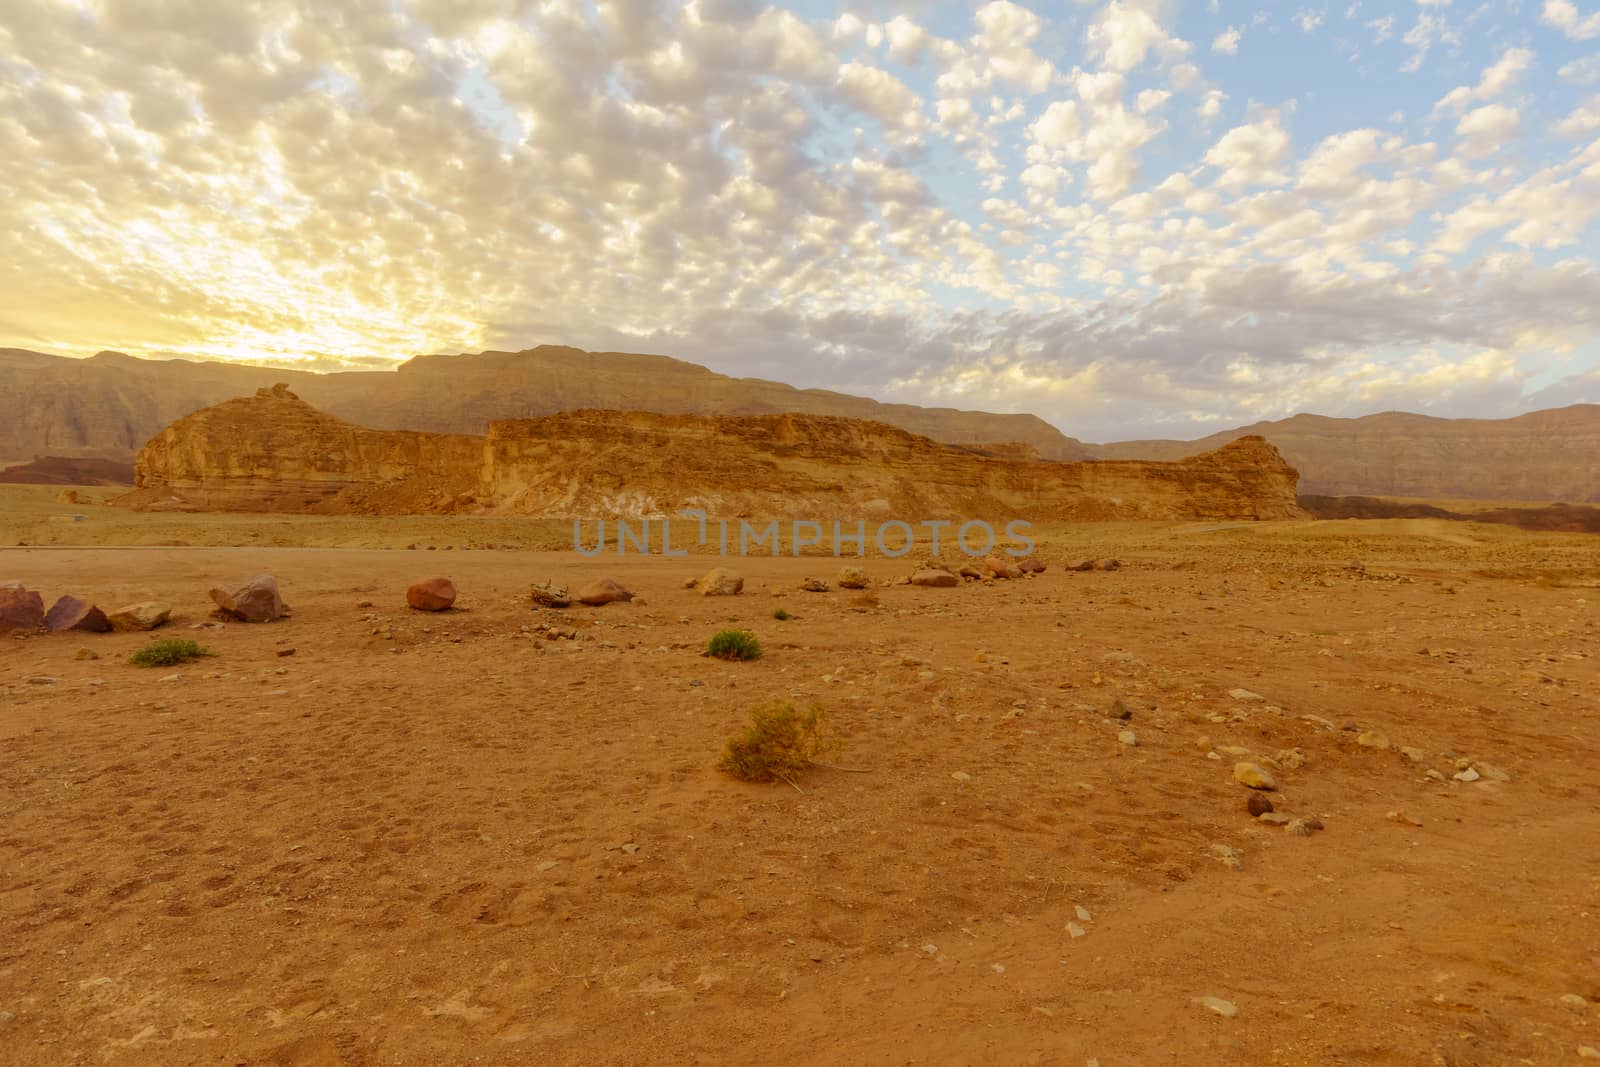 Sunset view of landscape and rock formations, in the Timna Valley, Arava desert, southern Israel